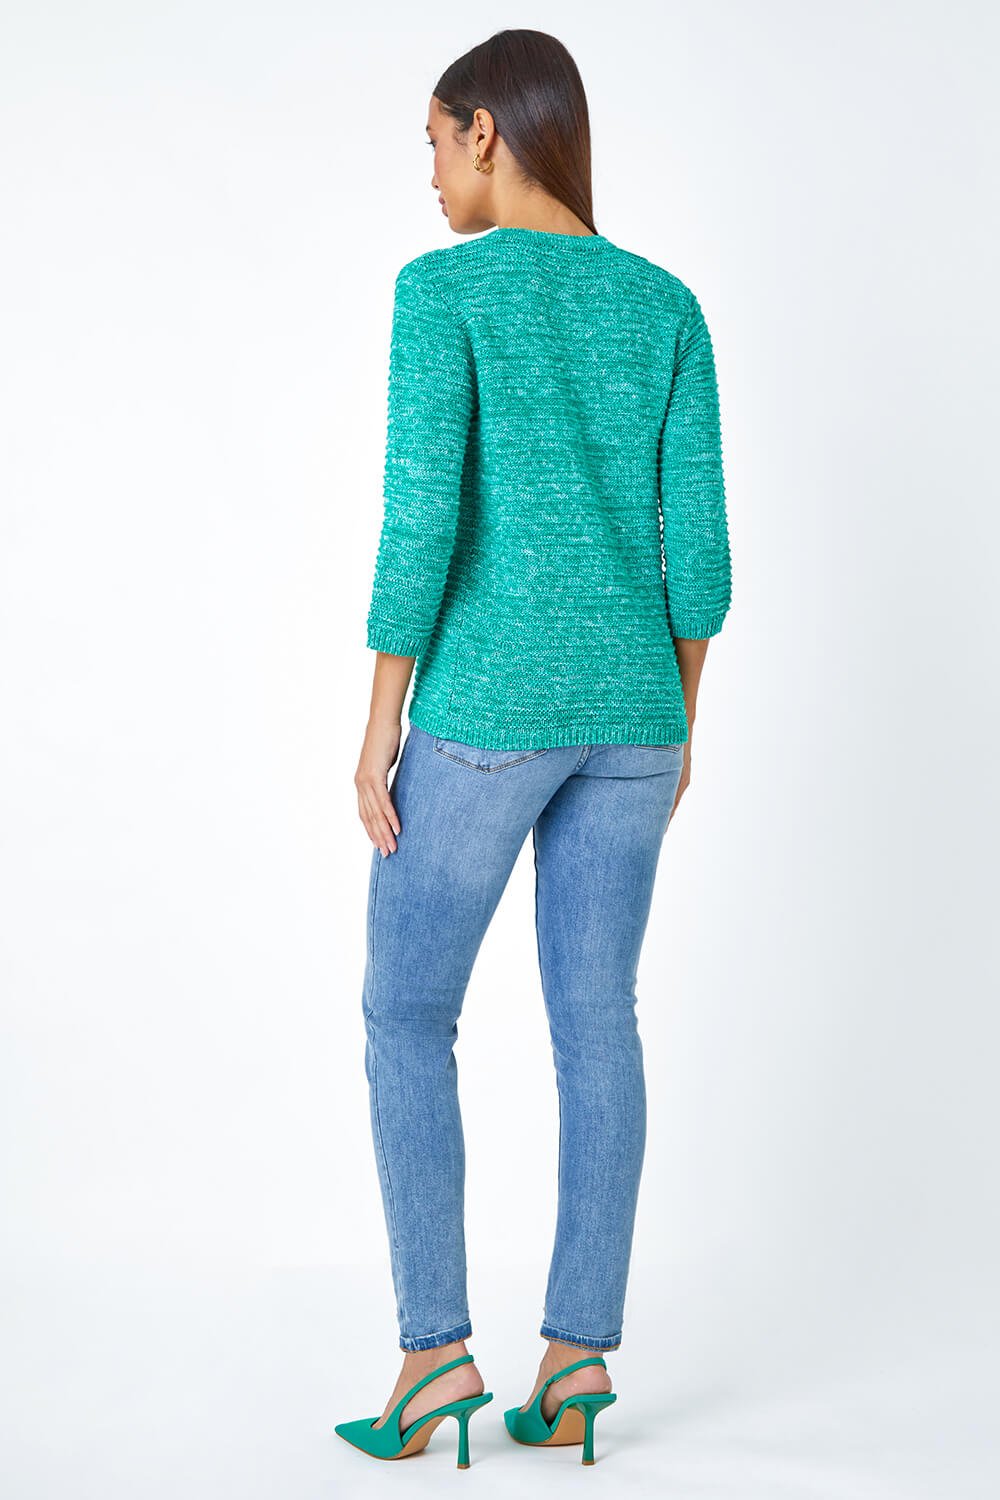 Green Cotton Blend Knitted Cardigan, Image 3 of 5